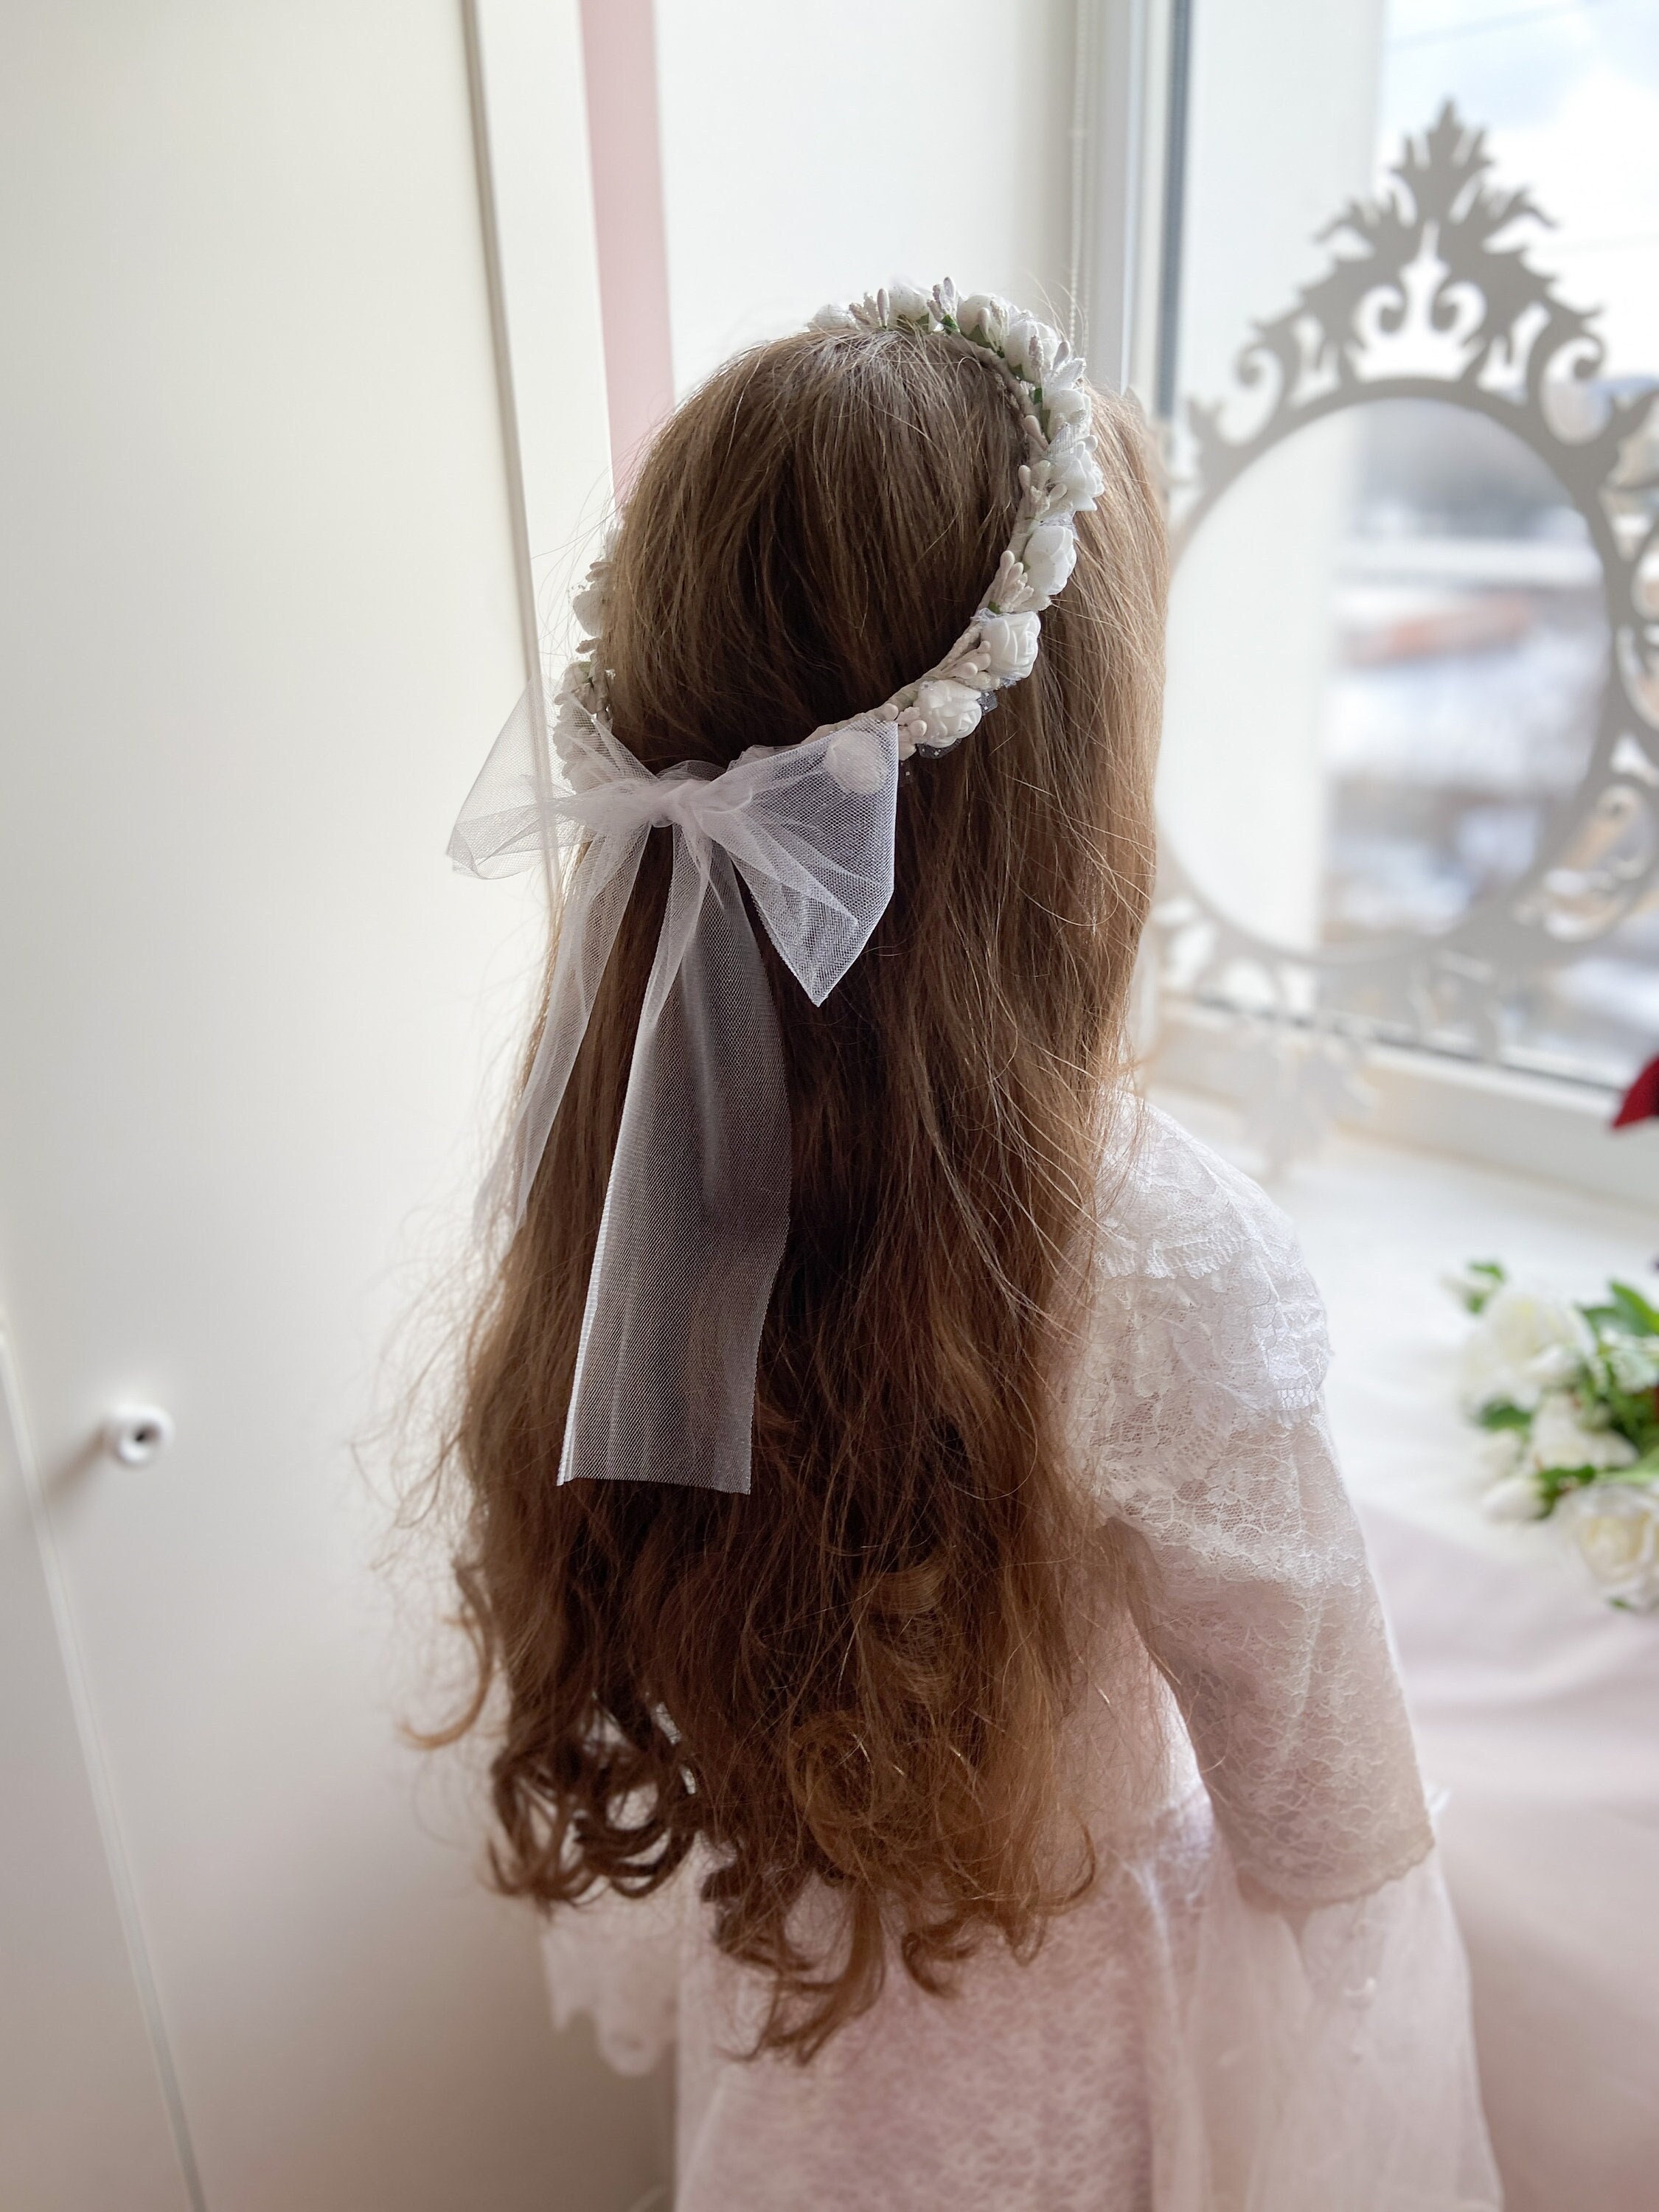 Baby Girl Pearl Bow Hair Clip First Communion Hair Accessories for Women  Sweet Cute Bridal Wedding Photo Daily Wearing Party Decoration(1pcs)